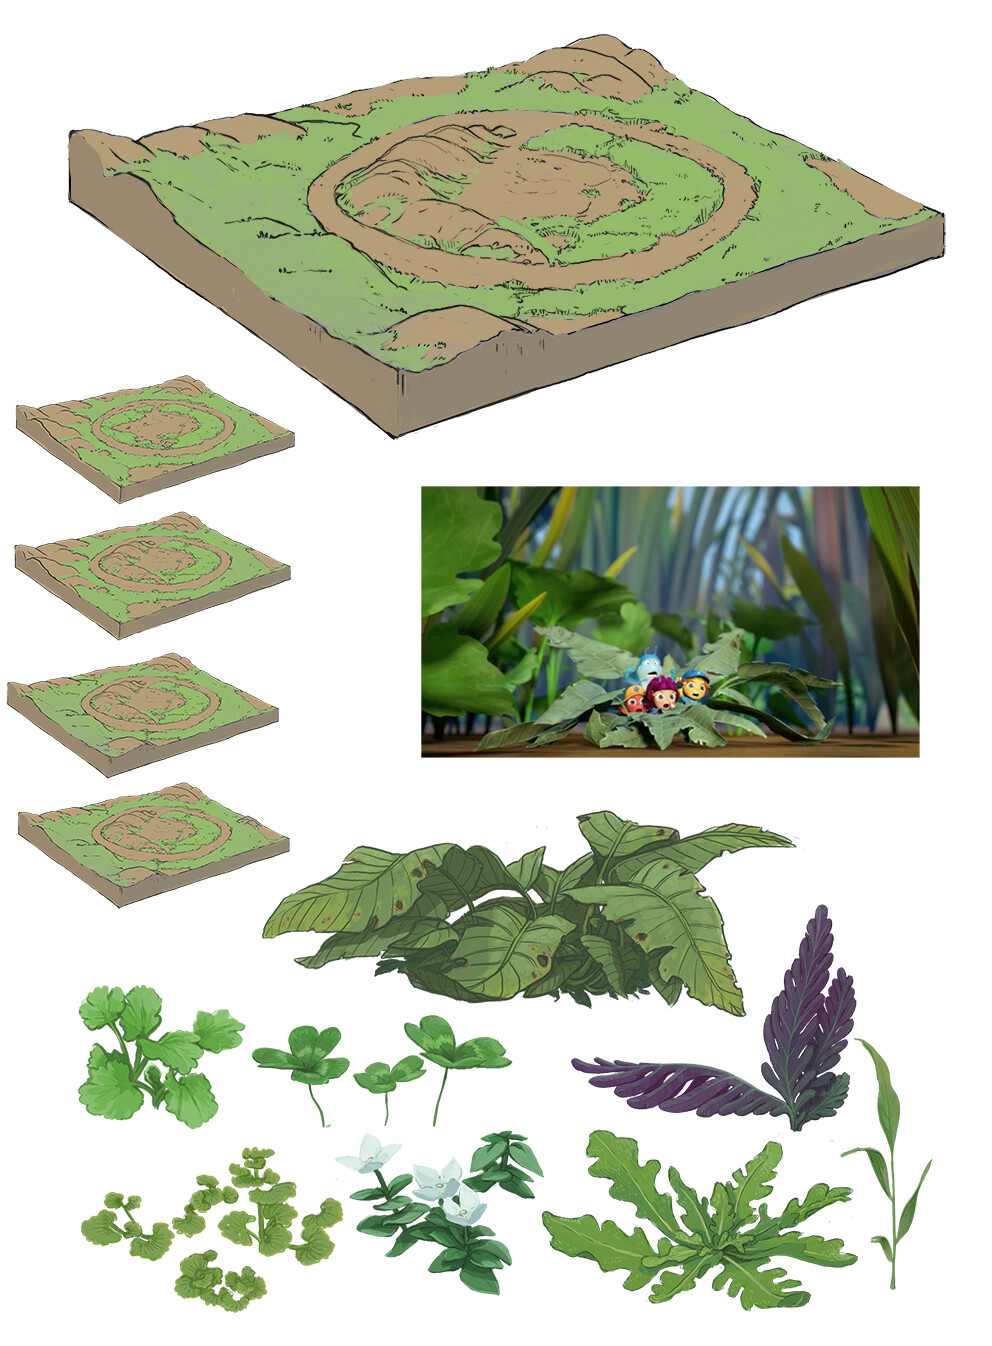 key bg overview design of the full garden set with specialty plants